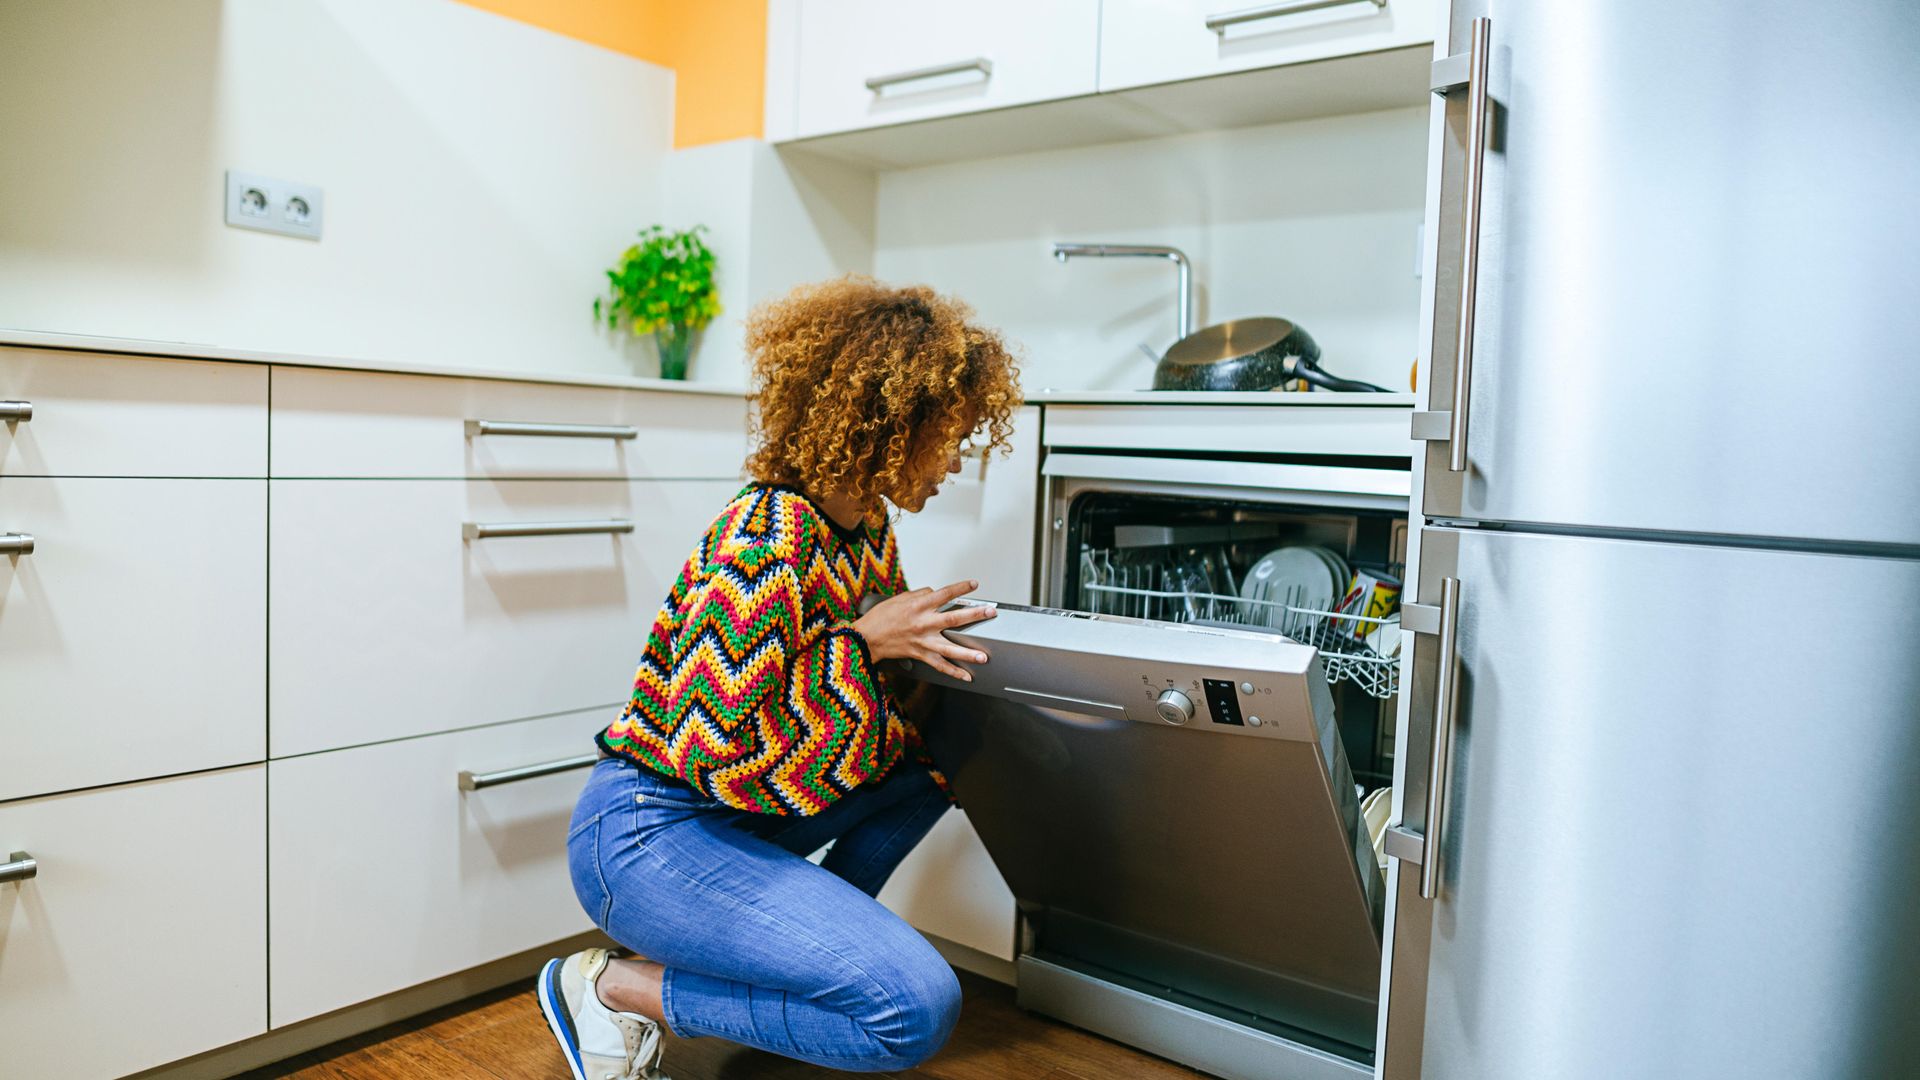 Young woman with curly opening the dishwasher in kitchen